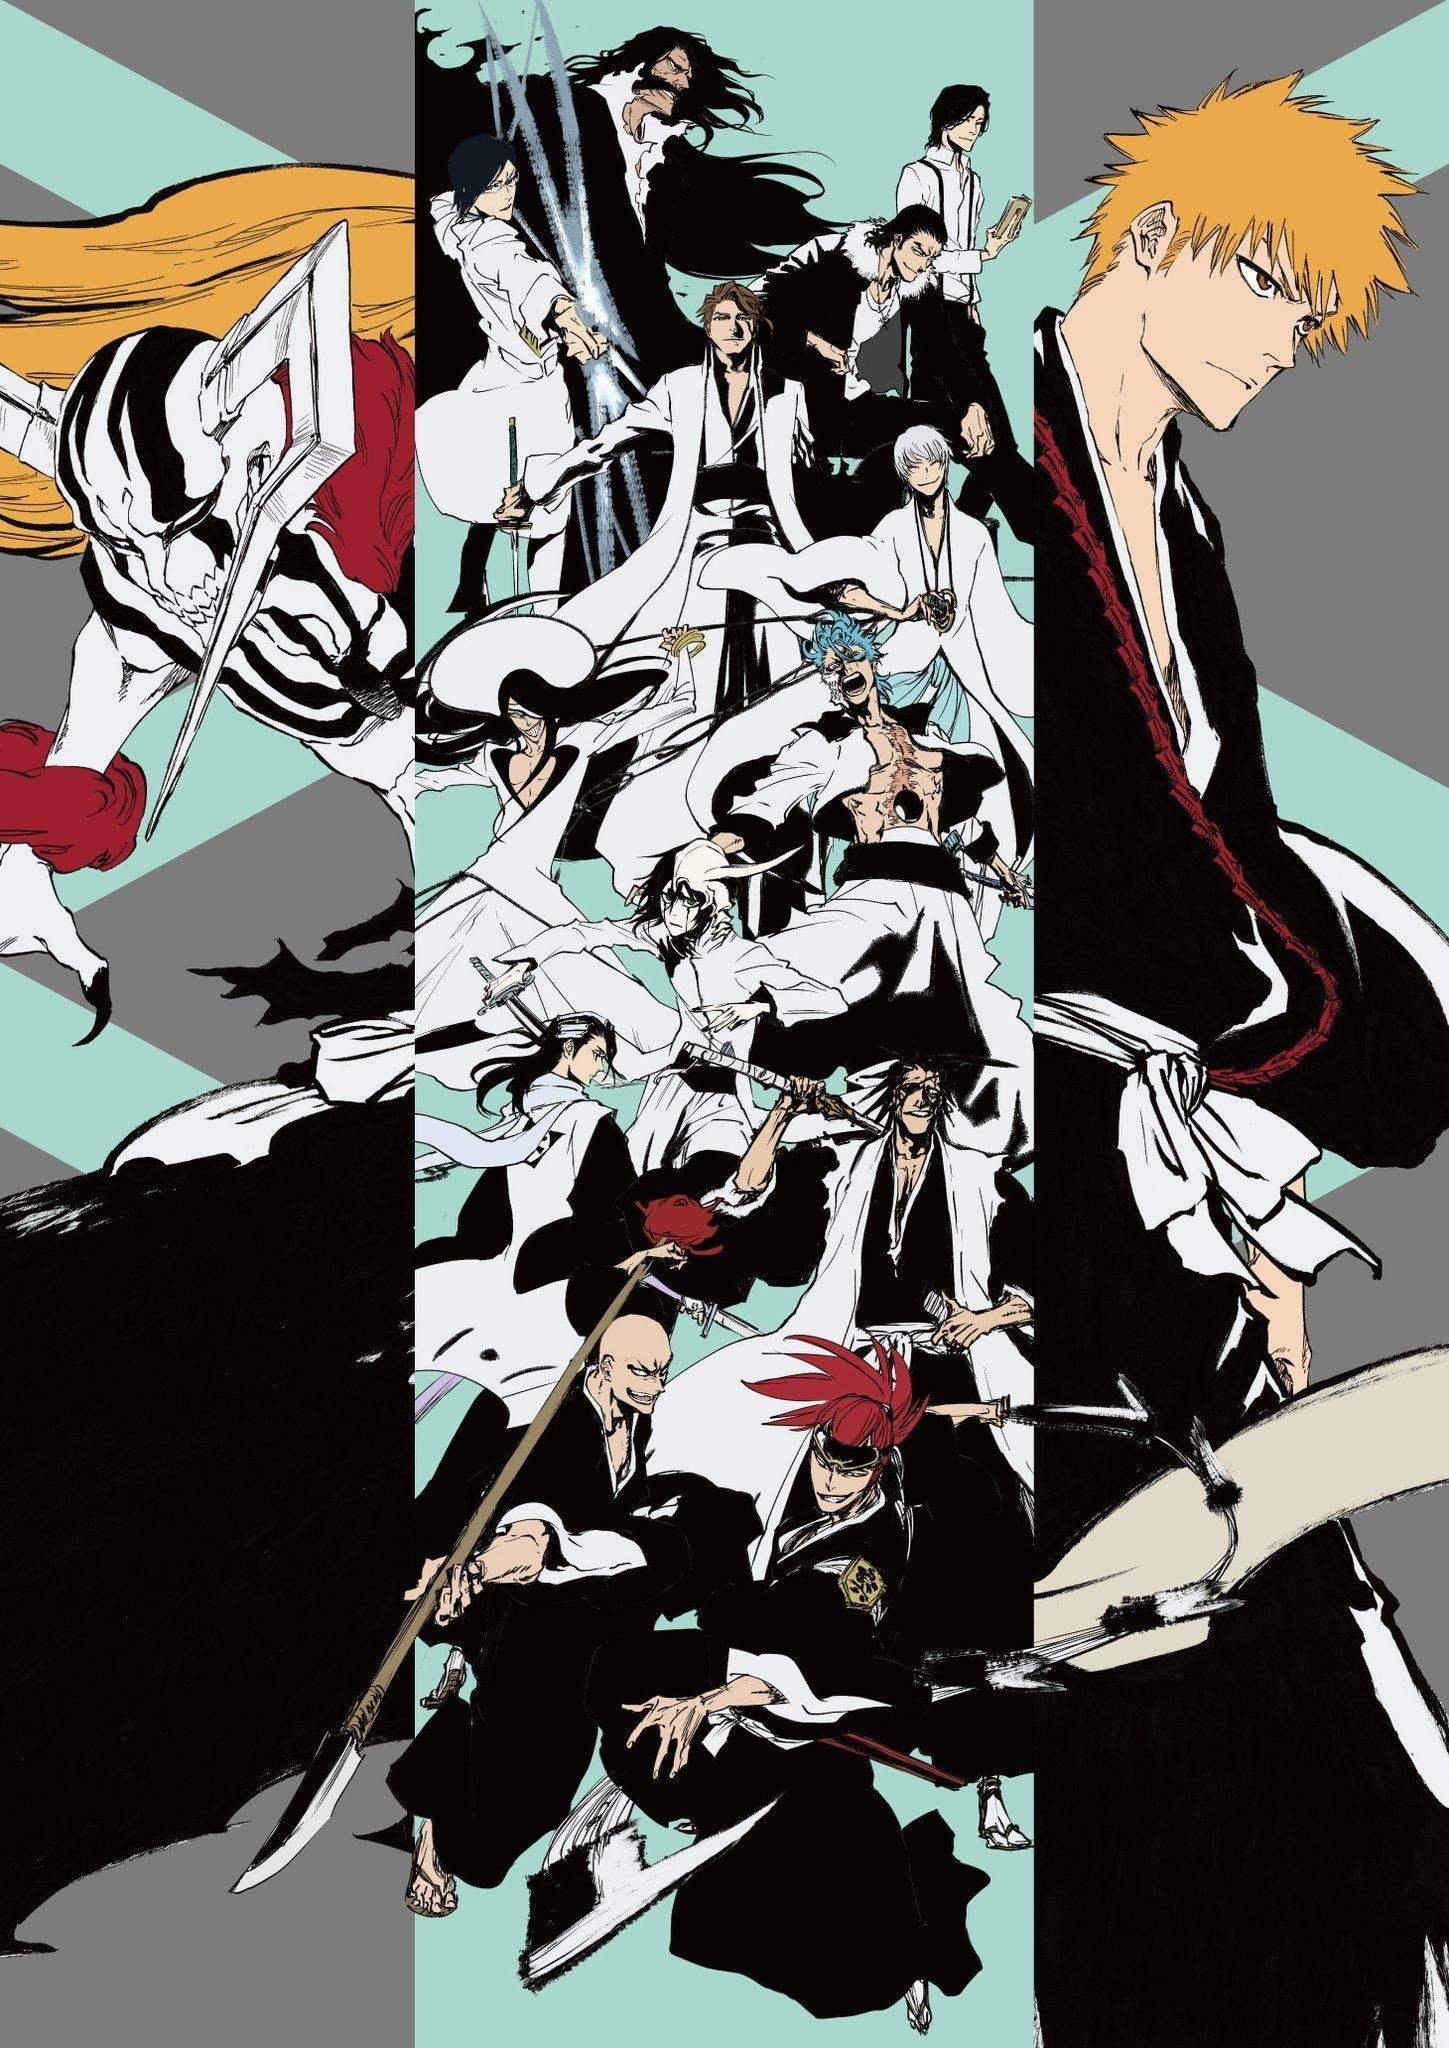 Bleach TYBW anime will be a 4-cour broadcast